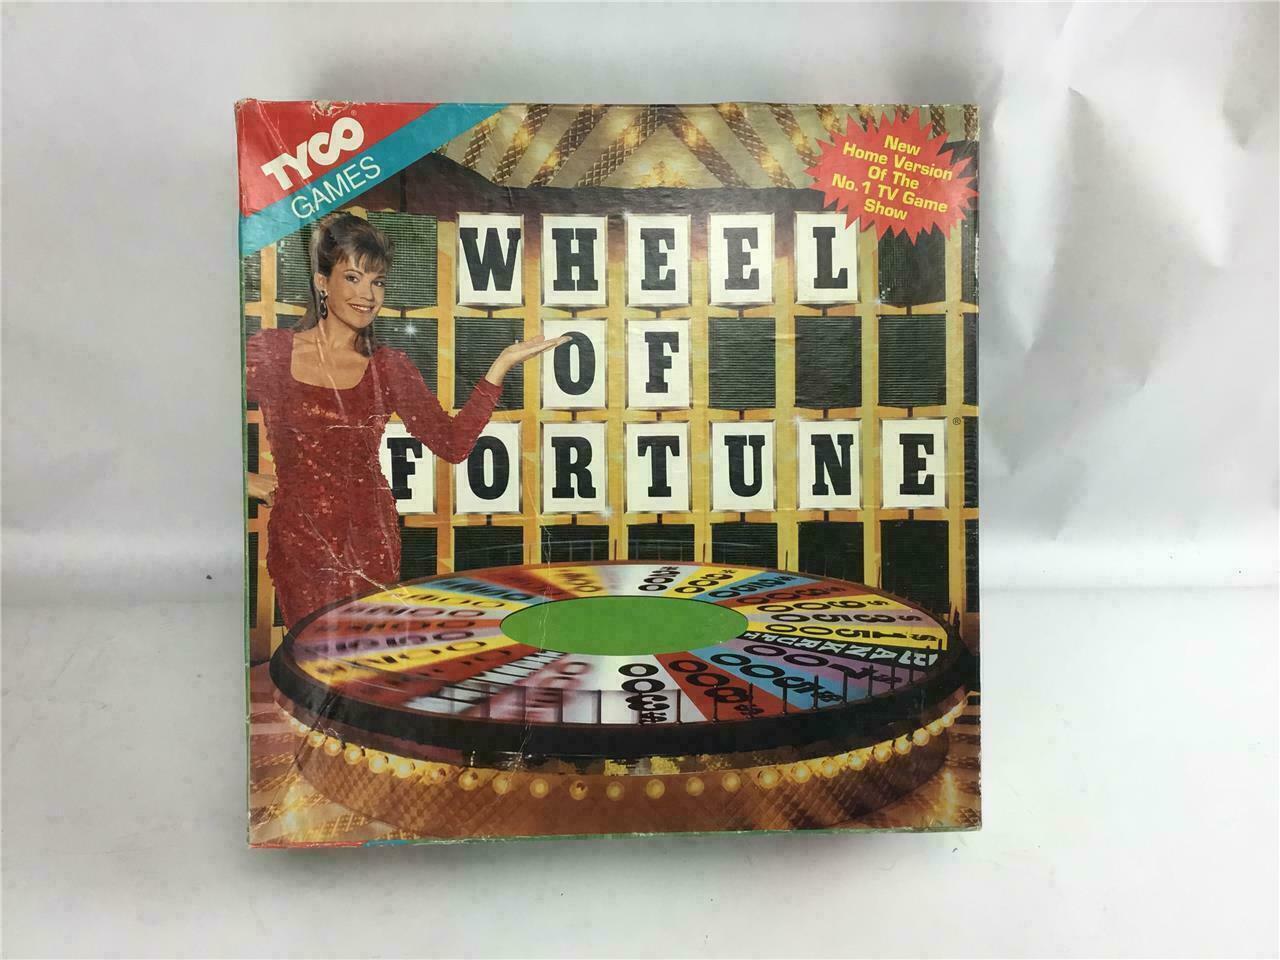 TYCO GAMES, WHEEL OF FORTUNE GAME - $15.35